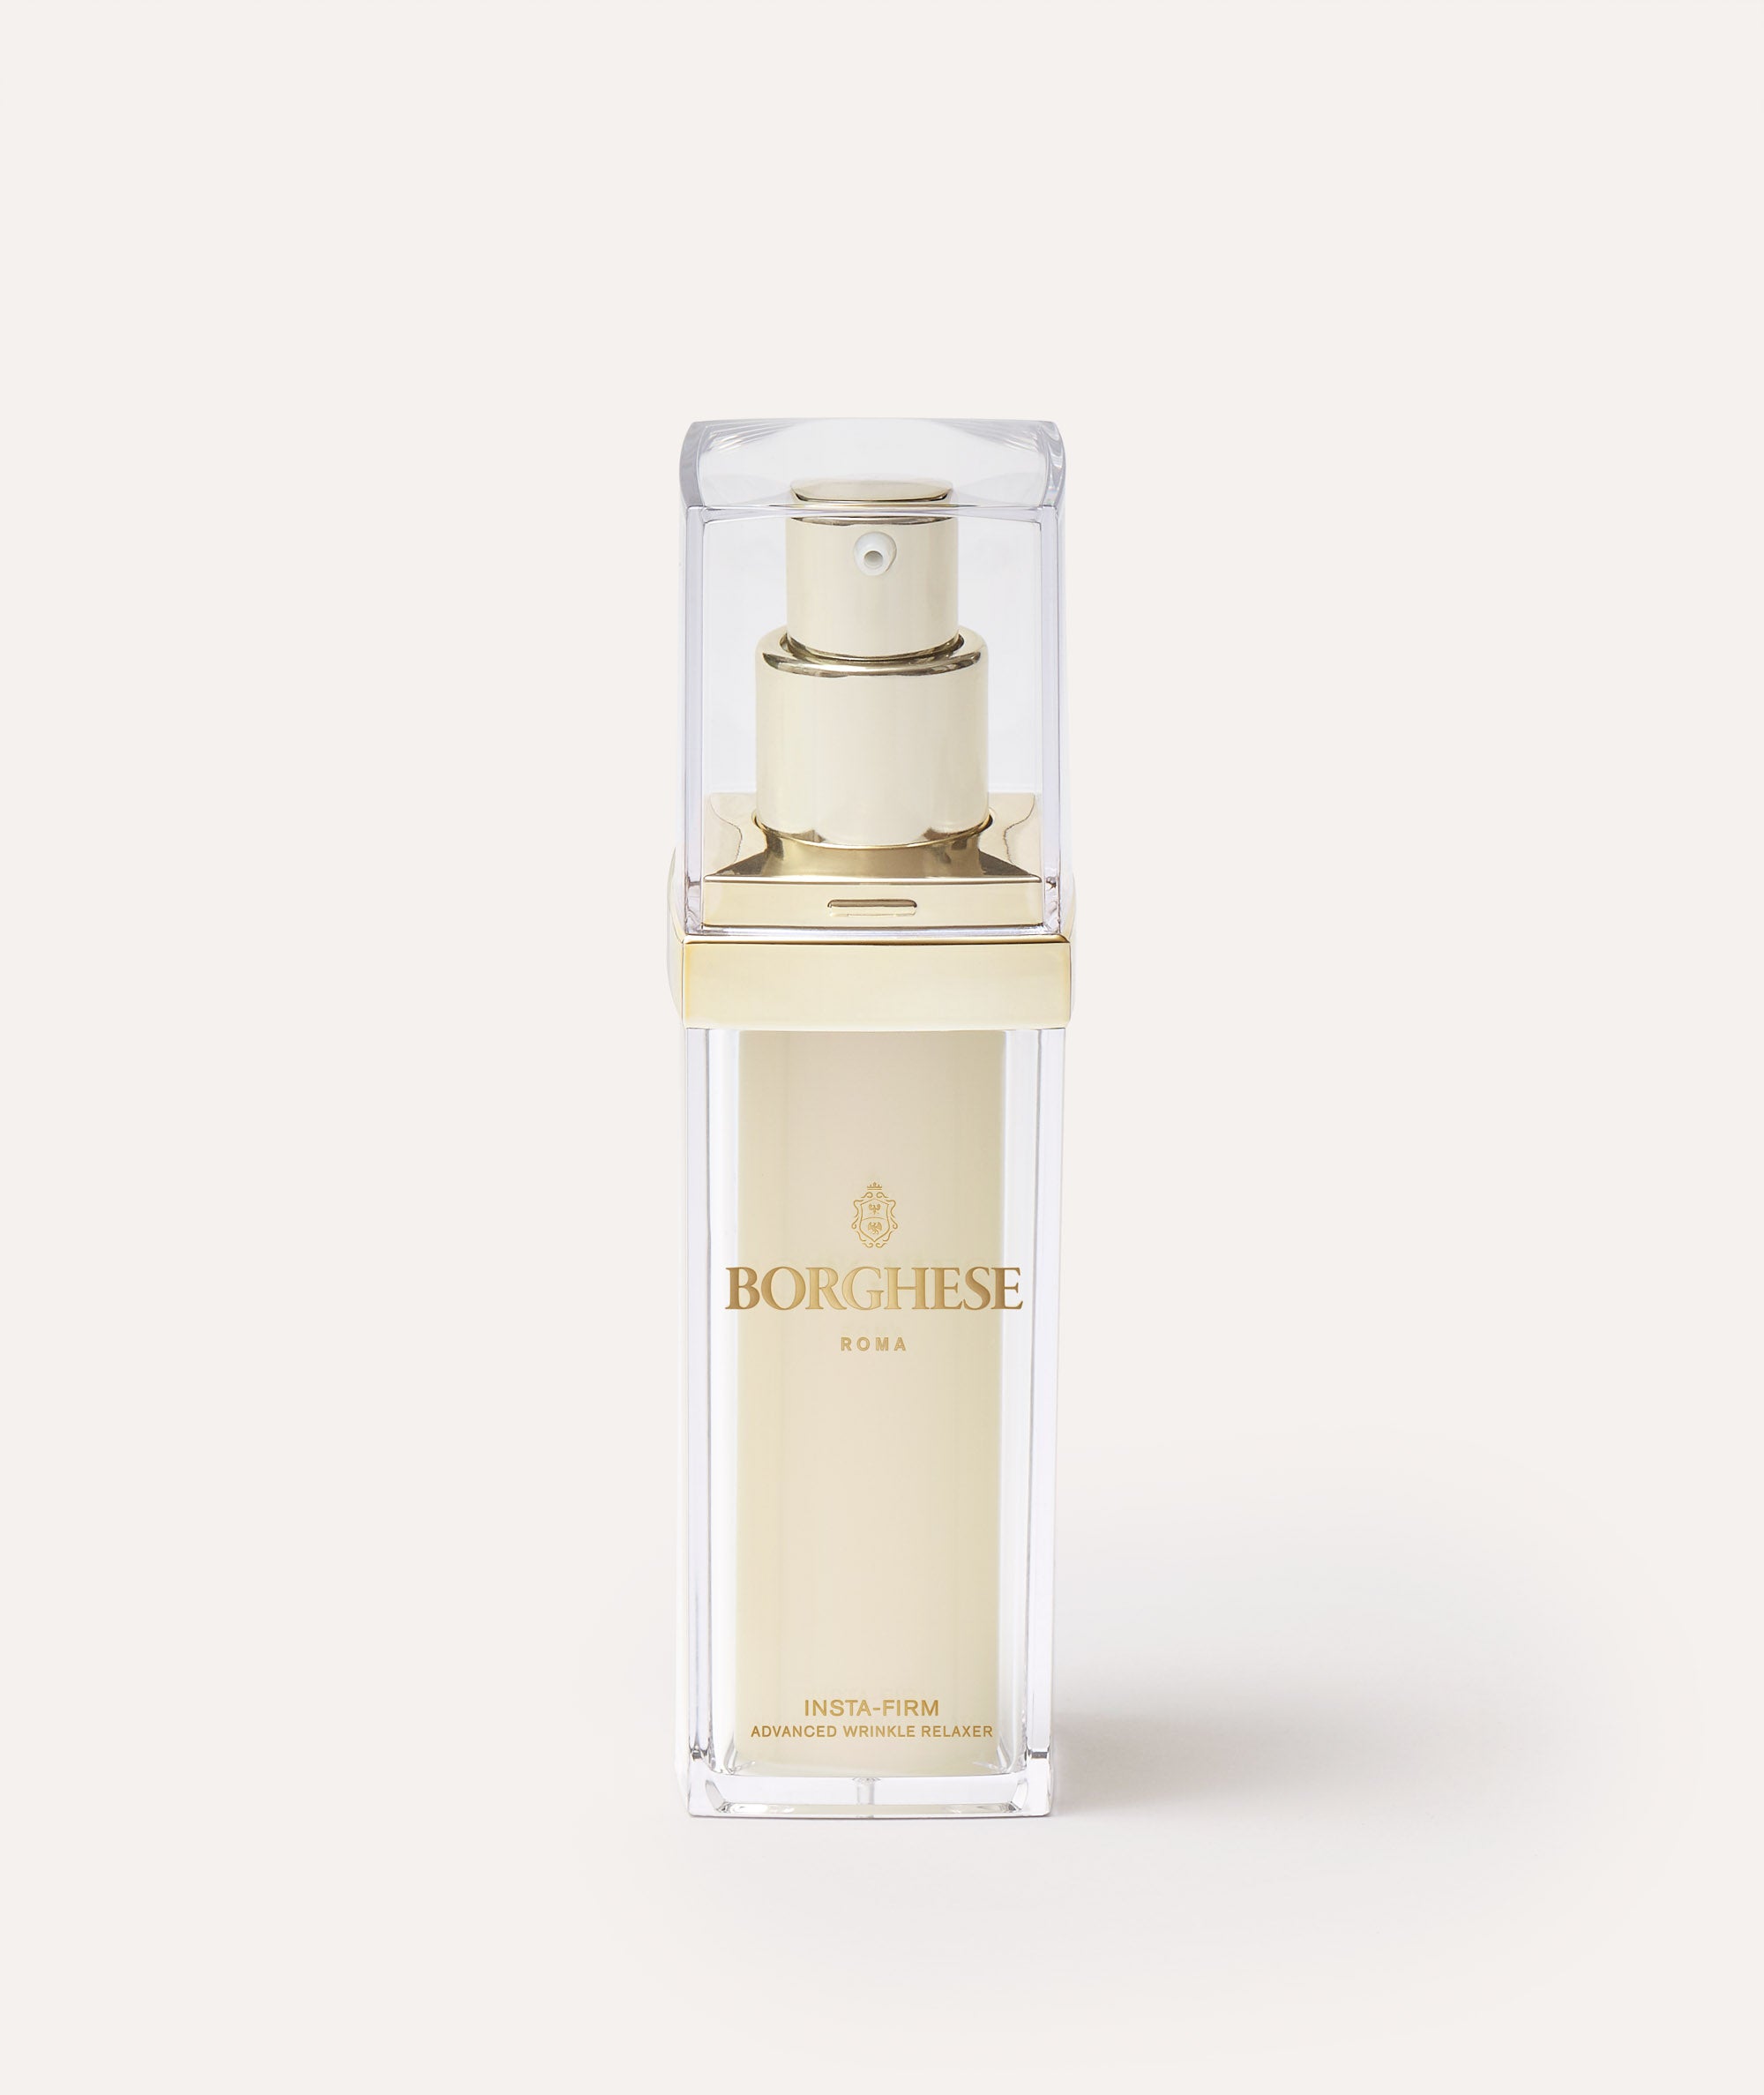 This is a picture of the bottle of the Borghese Roma Insta-Firm Advanced Wrinkle Repair Serum